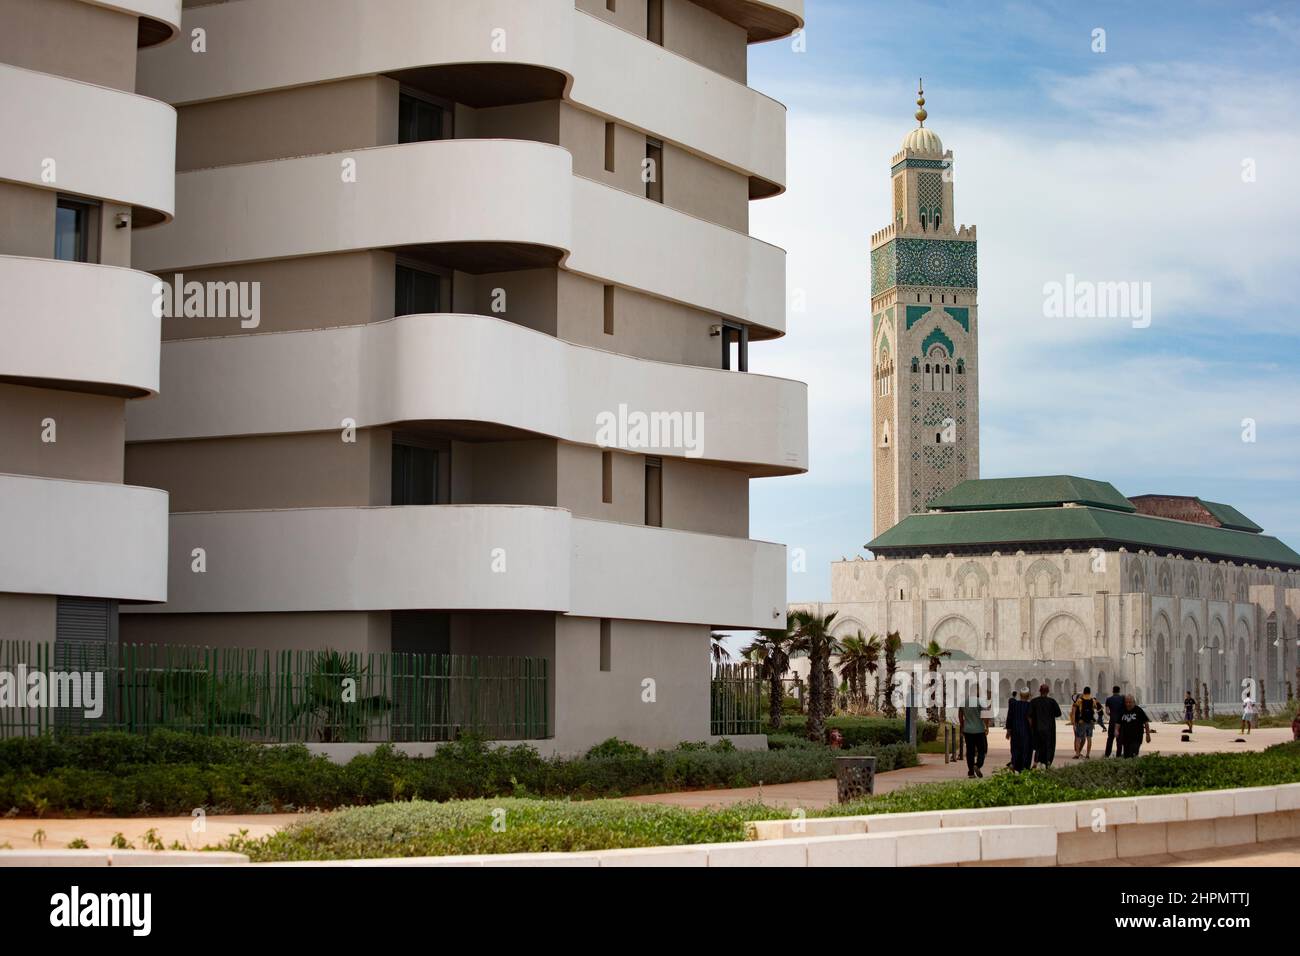 The Hassan II Mosque stands alongside contemporary apartment buildings on the waterfront at Casablanca, Morocco. Stock Photo